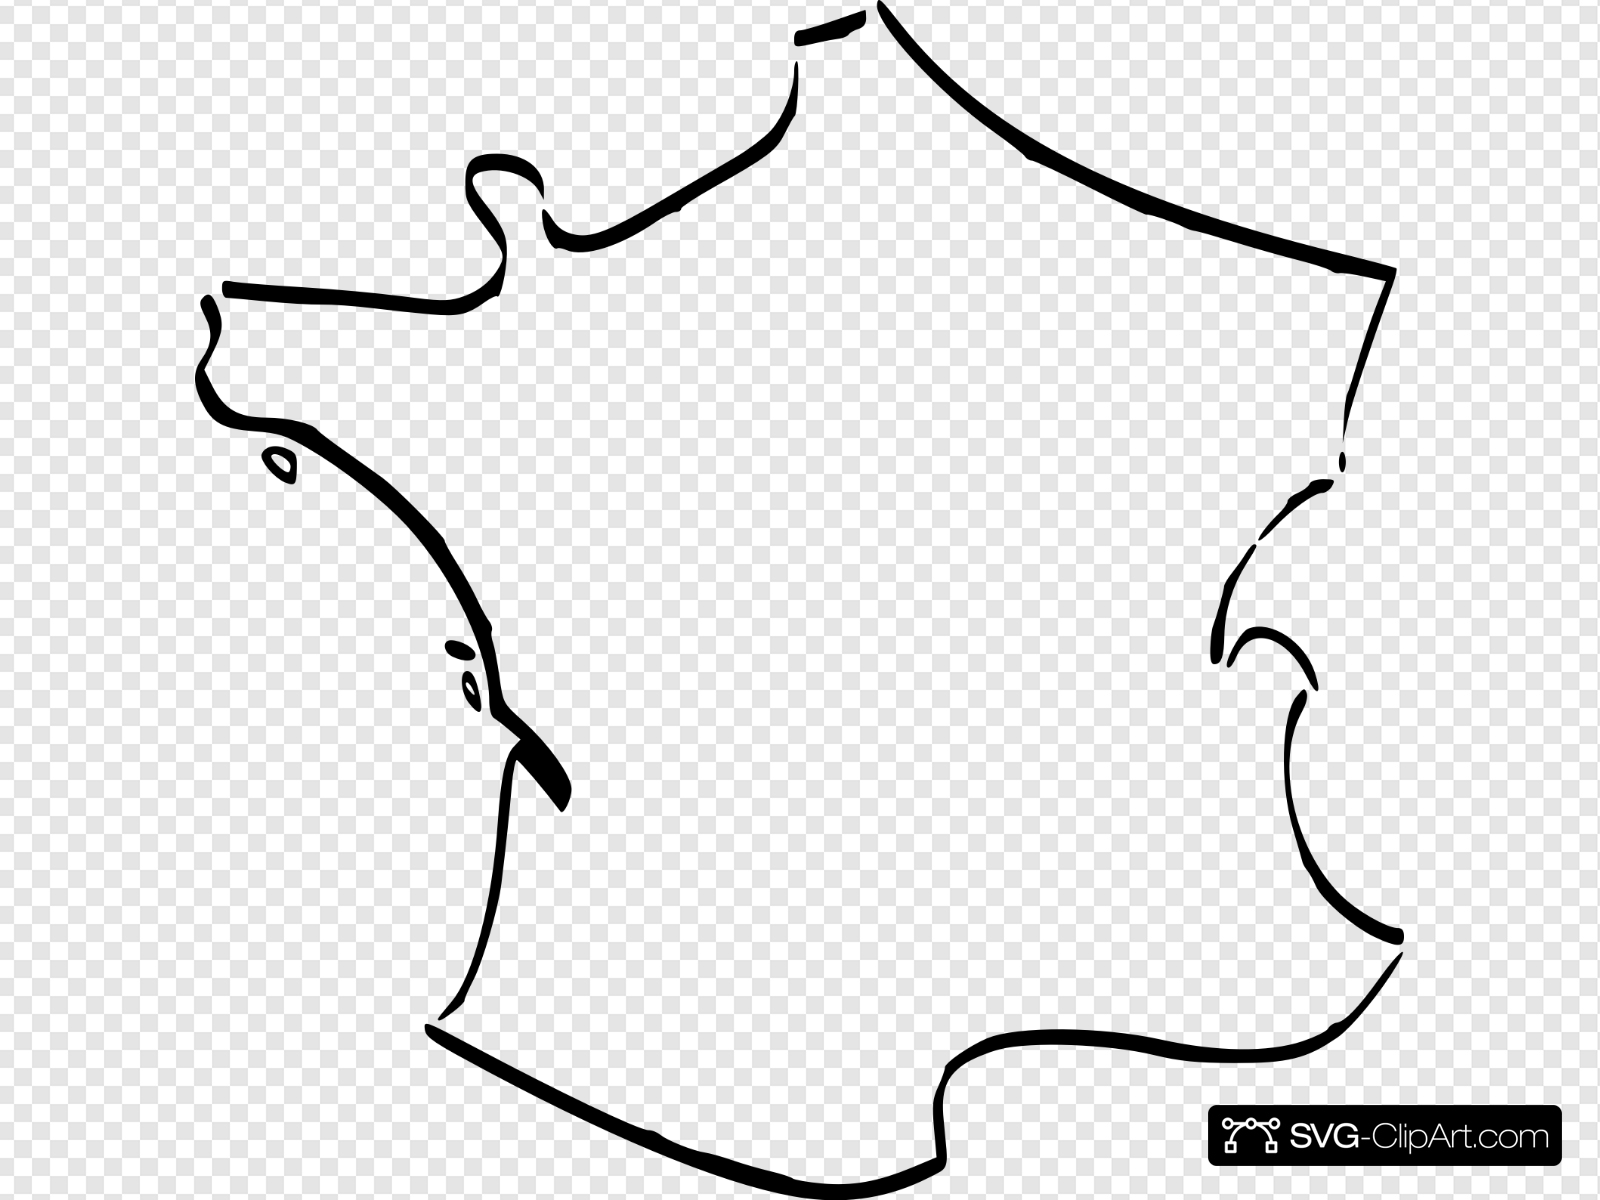 Steren France Clip art, Icon and SVG.